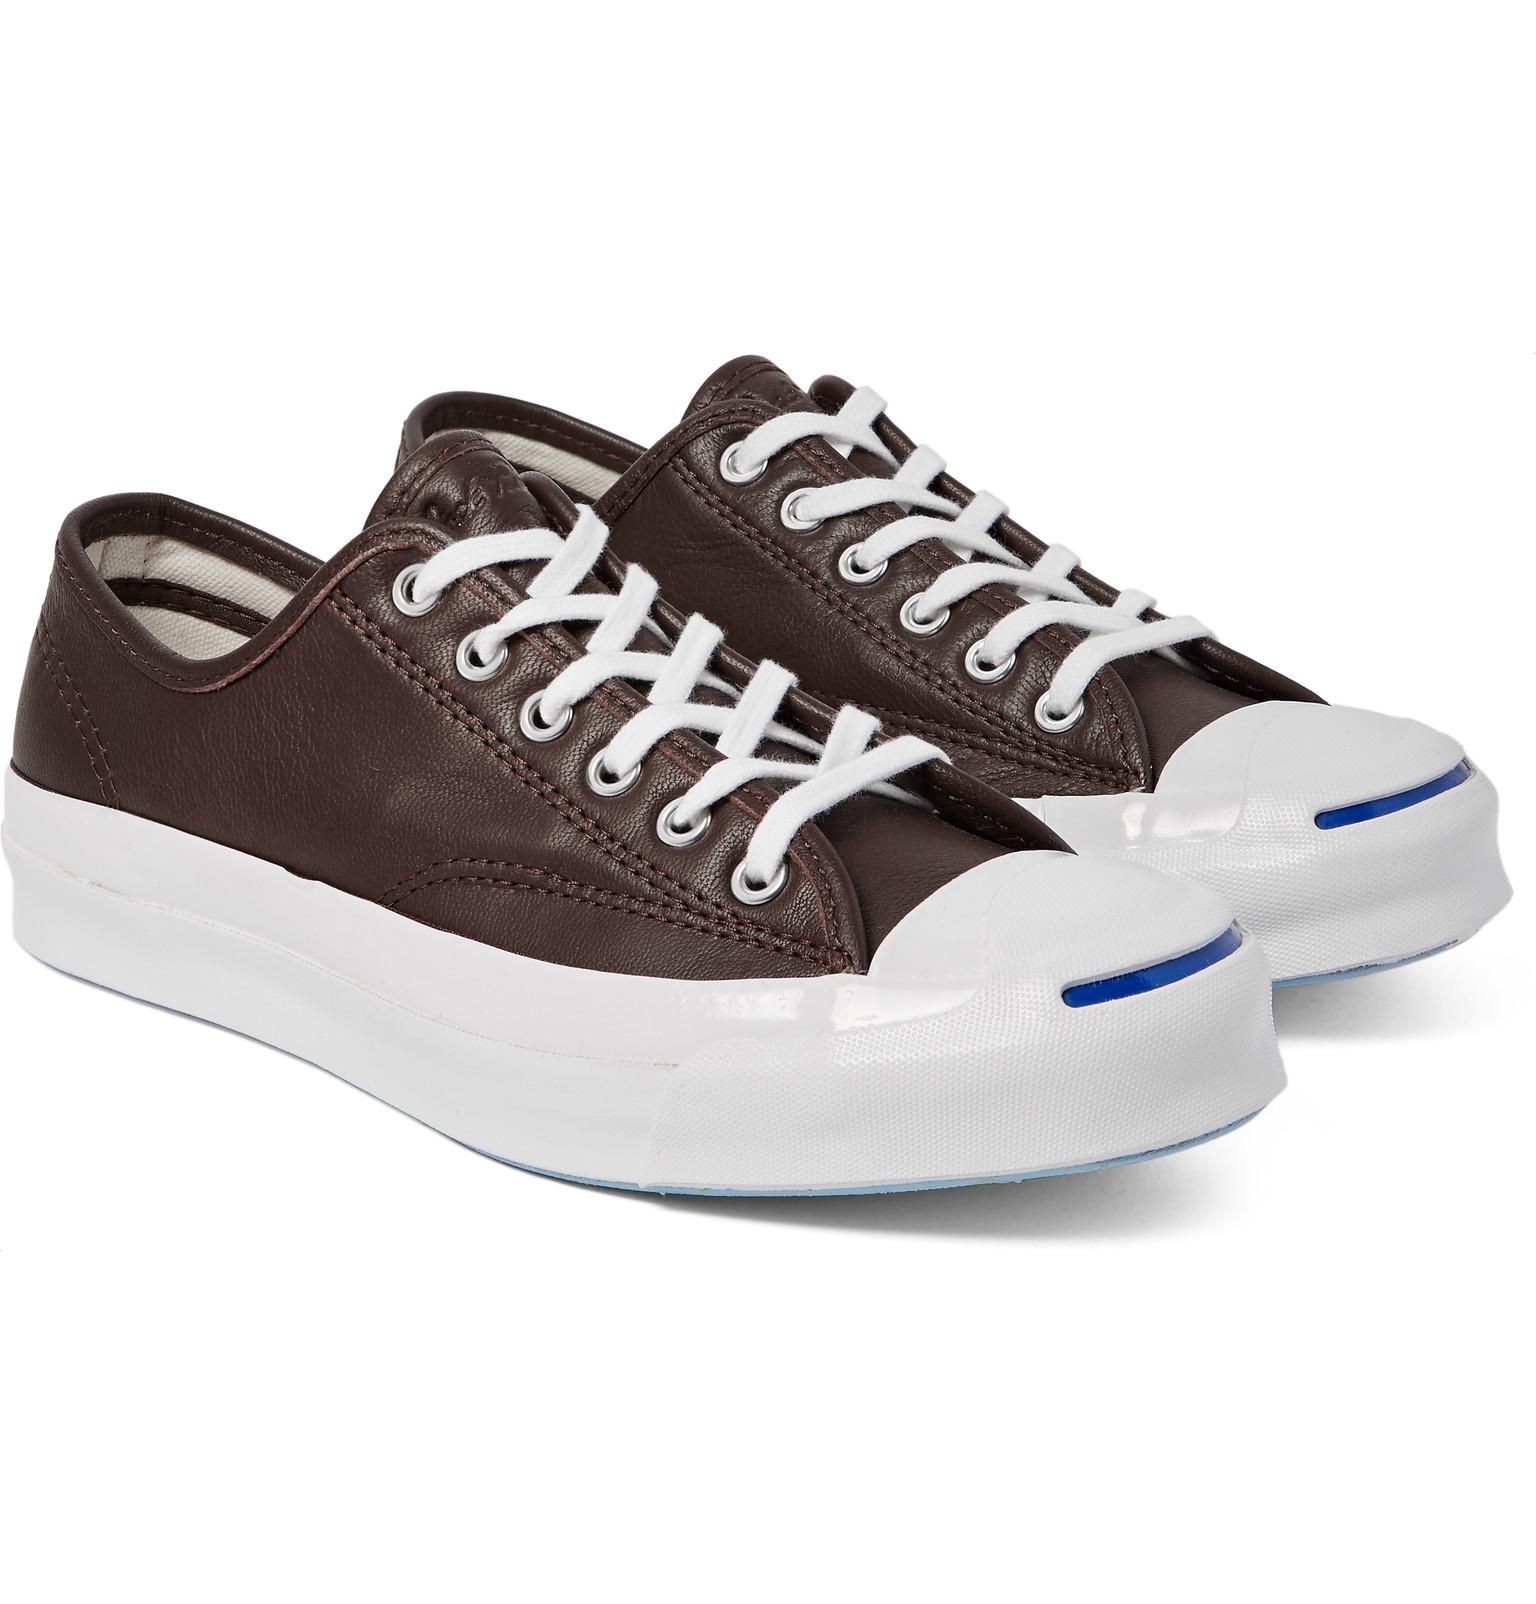 Converse Jack Purcell Signature Leather Sneakers in Brown for Men